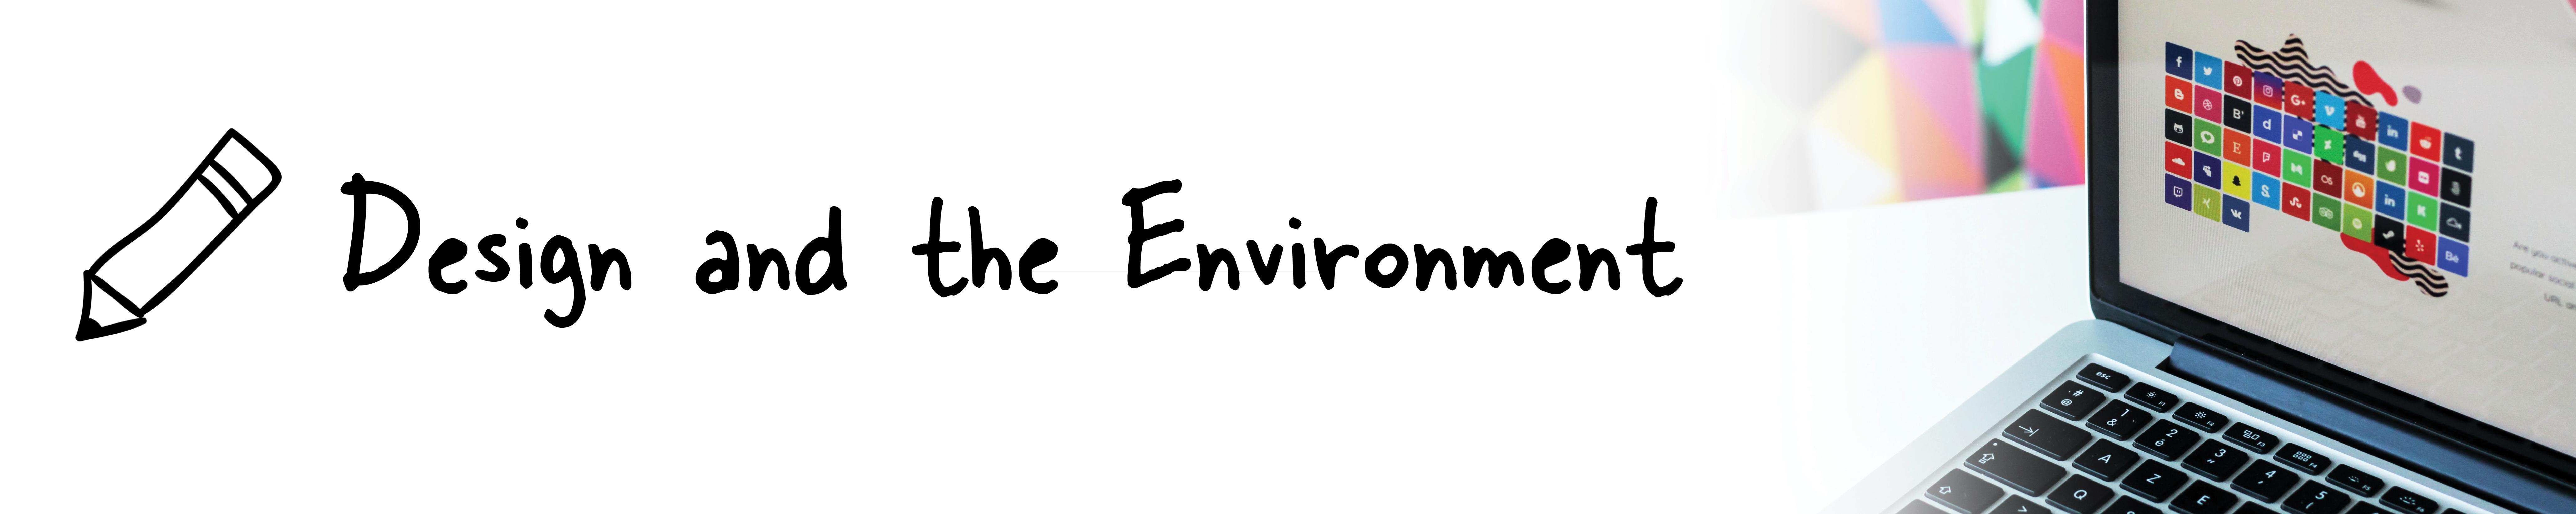 Design and the Environment